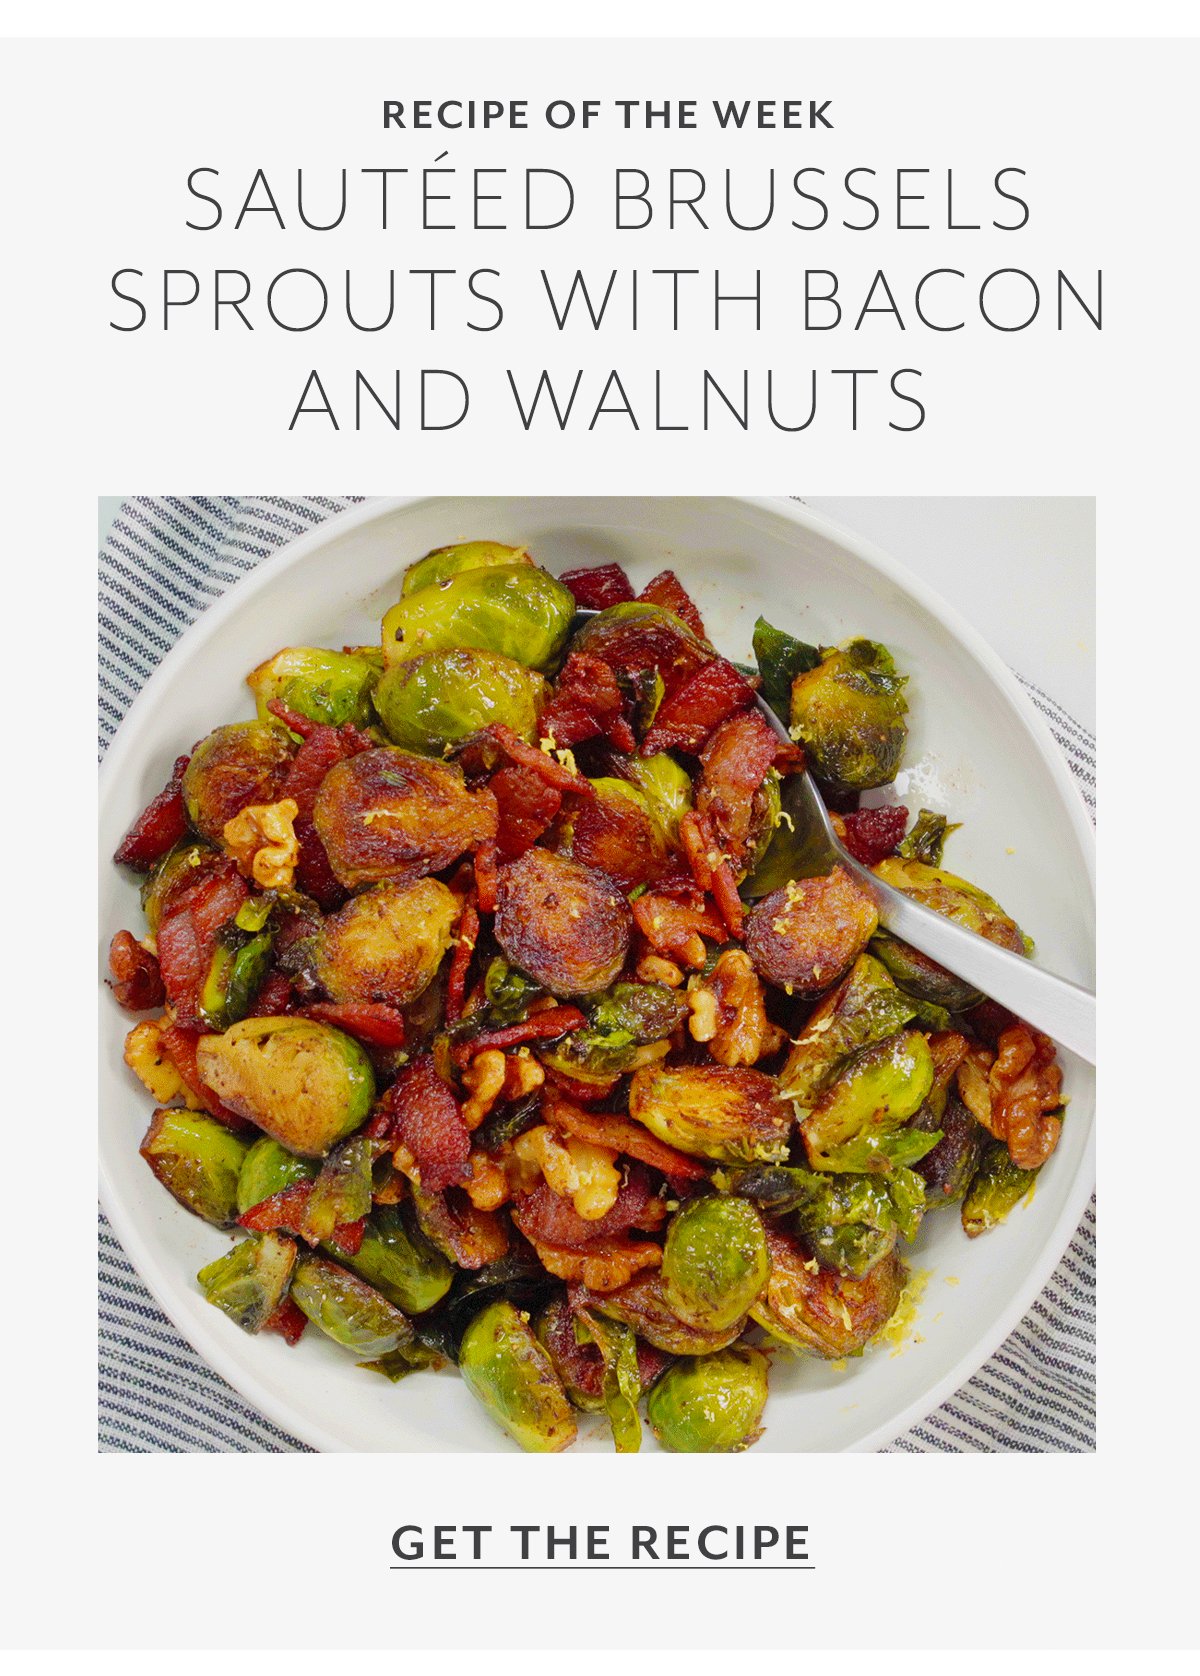 SAUTEED BRUSSELS SPROUTS WITH BACON AND WALNUTS